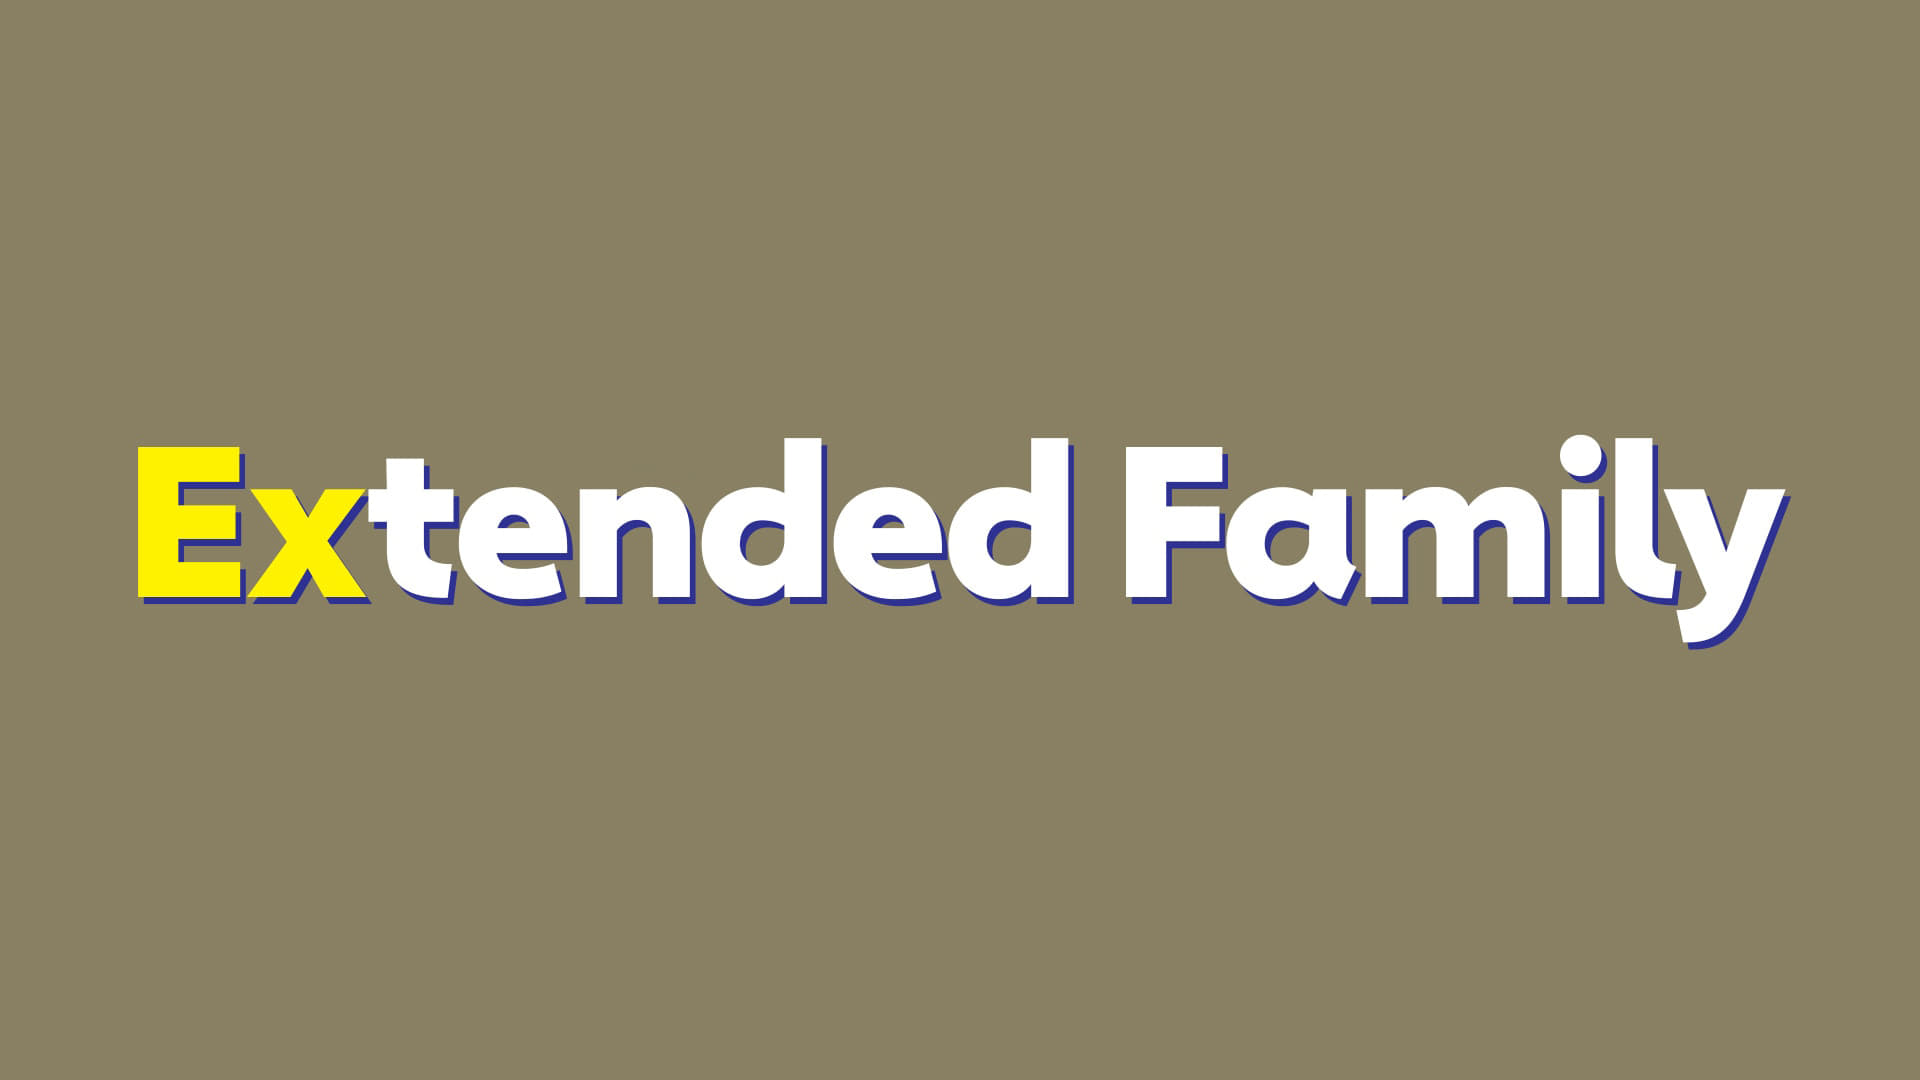 Extended Family Gallery Image